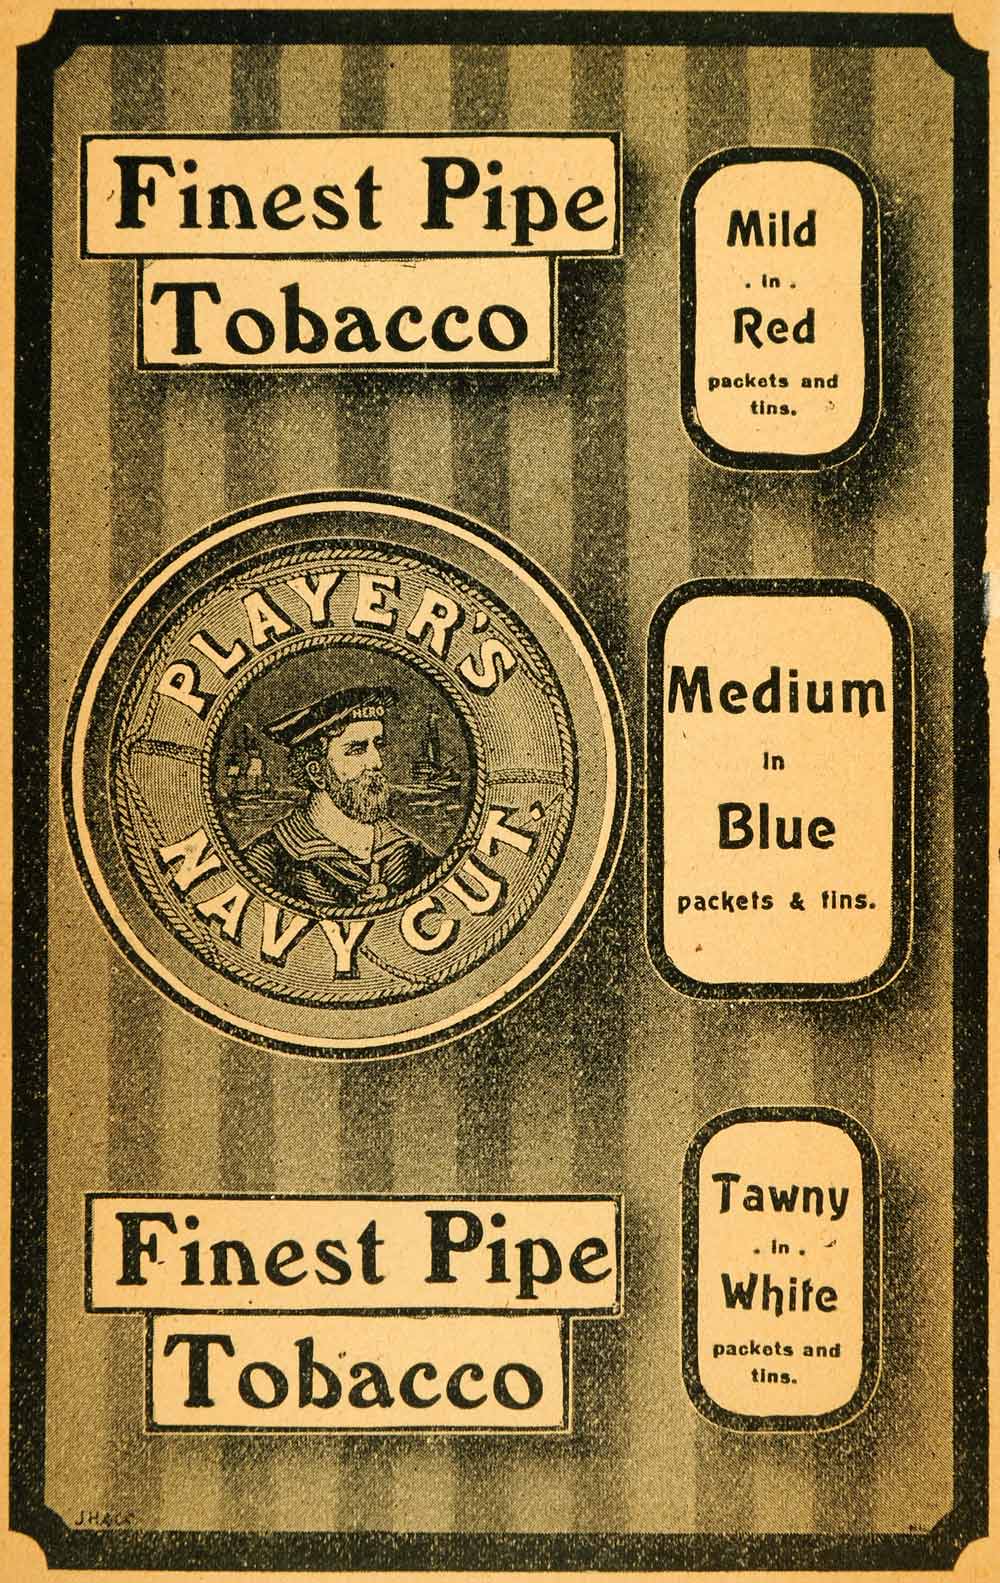 1908 Ad Pipe Tobacco John Players Navy Cut Imperial Group Nottingham XGO5